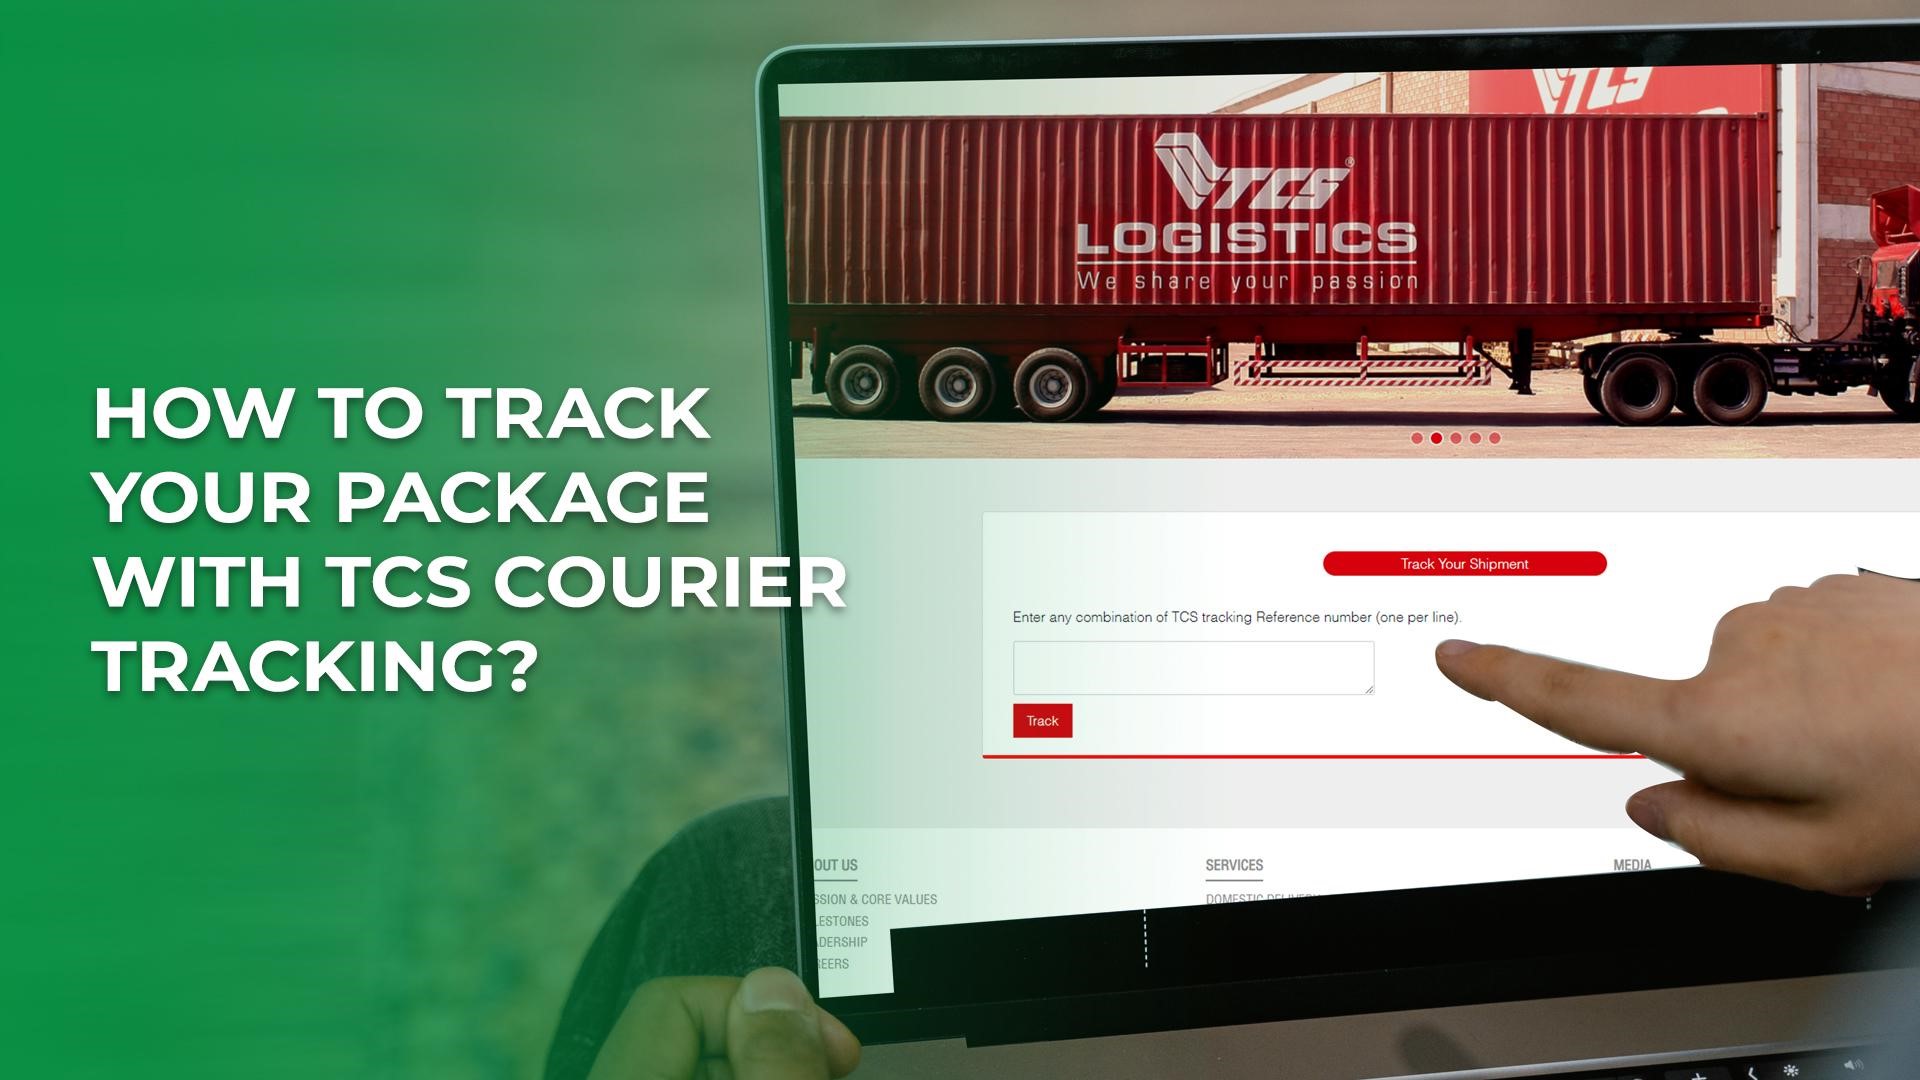 How To Track Your Package With TCS Courier?